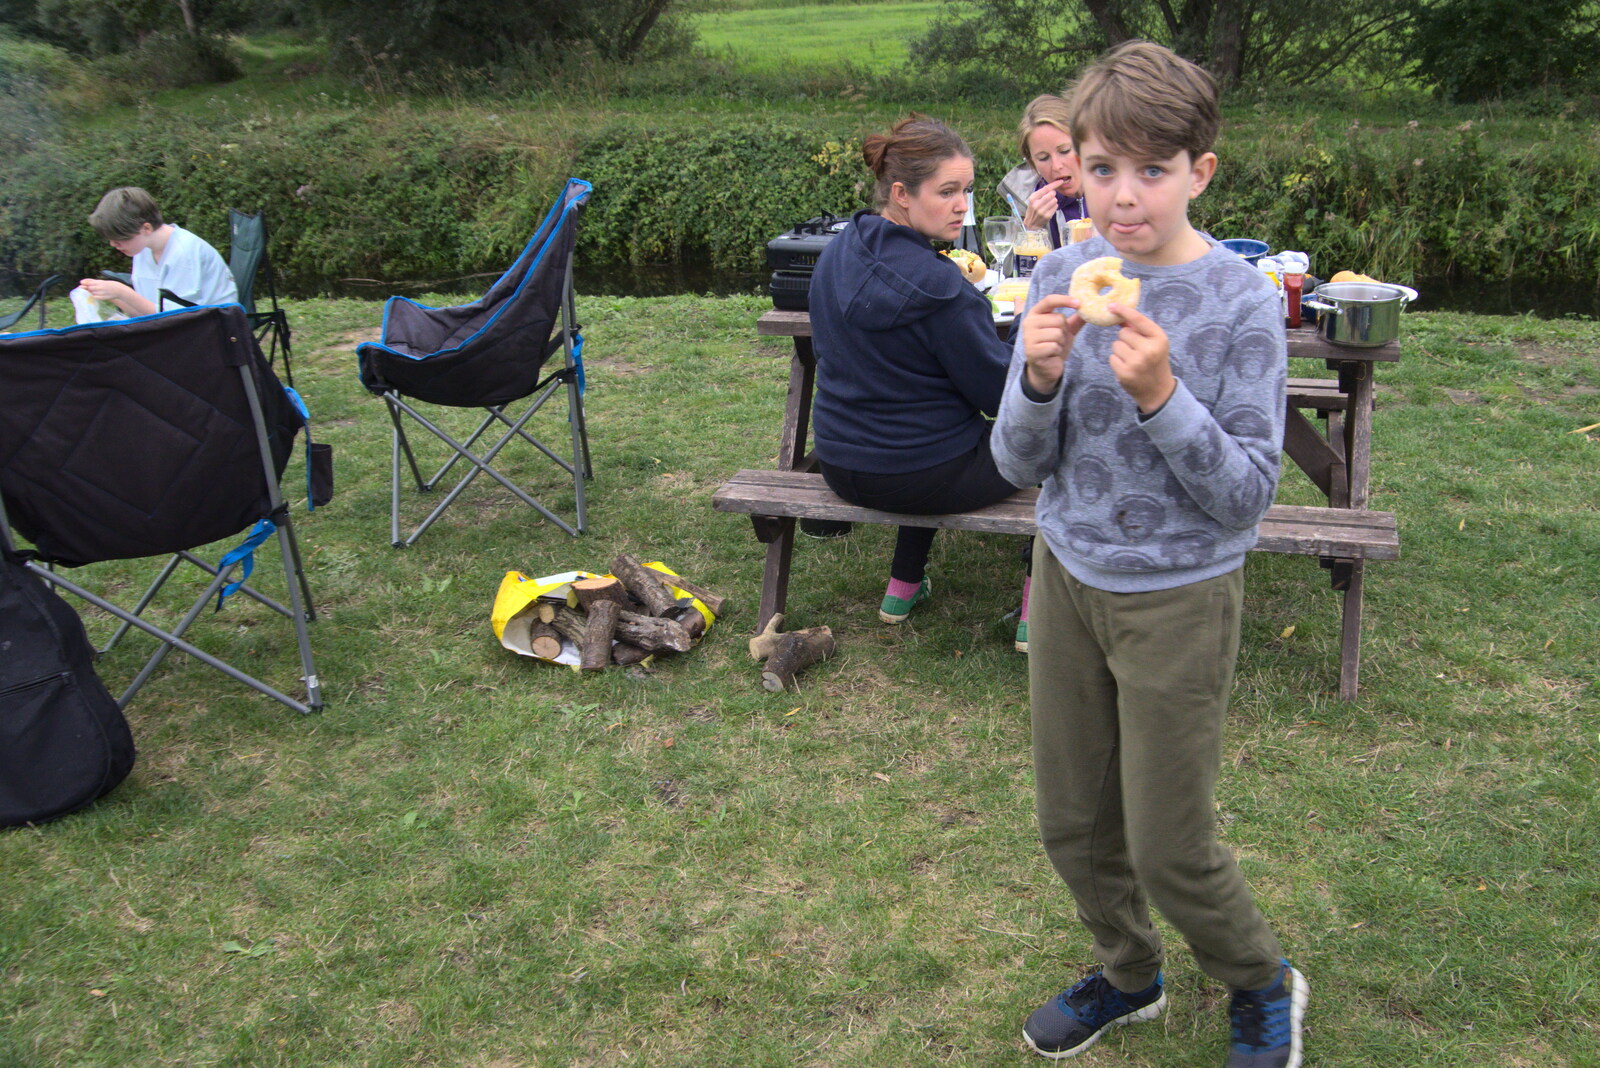 Camping at Three Rivers, Geldeston, Norfolk - 5th September 2020: At three Rivers, Fred's on the doughnuts